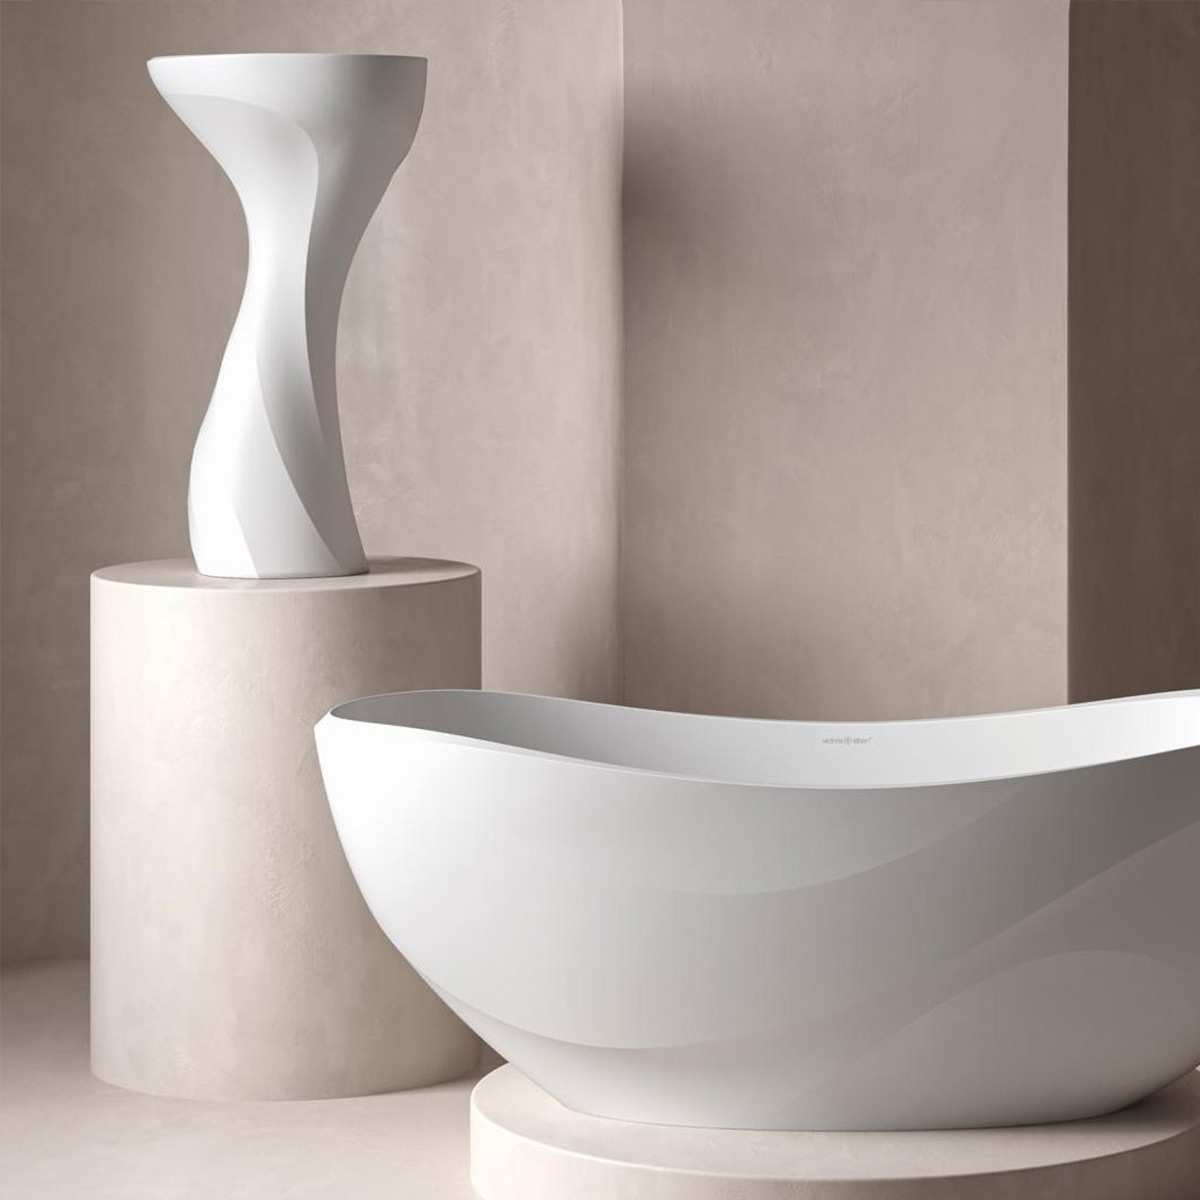 Victoria + Albert Seros 49 Pedestal Basin, sculpted wave design stone freestanding podium basin inspired by Sophie Elizabeth Thompson sculptures. Available in Gloss White and Matt White in bath, vessel basin and pedestal basin formats. Distributed in Australia by Luxe by Design, Brisbane.